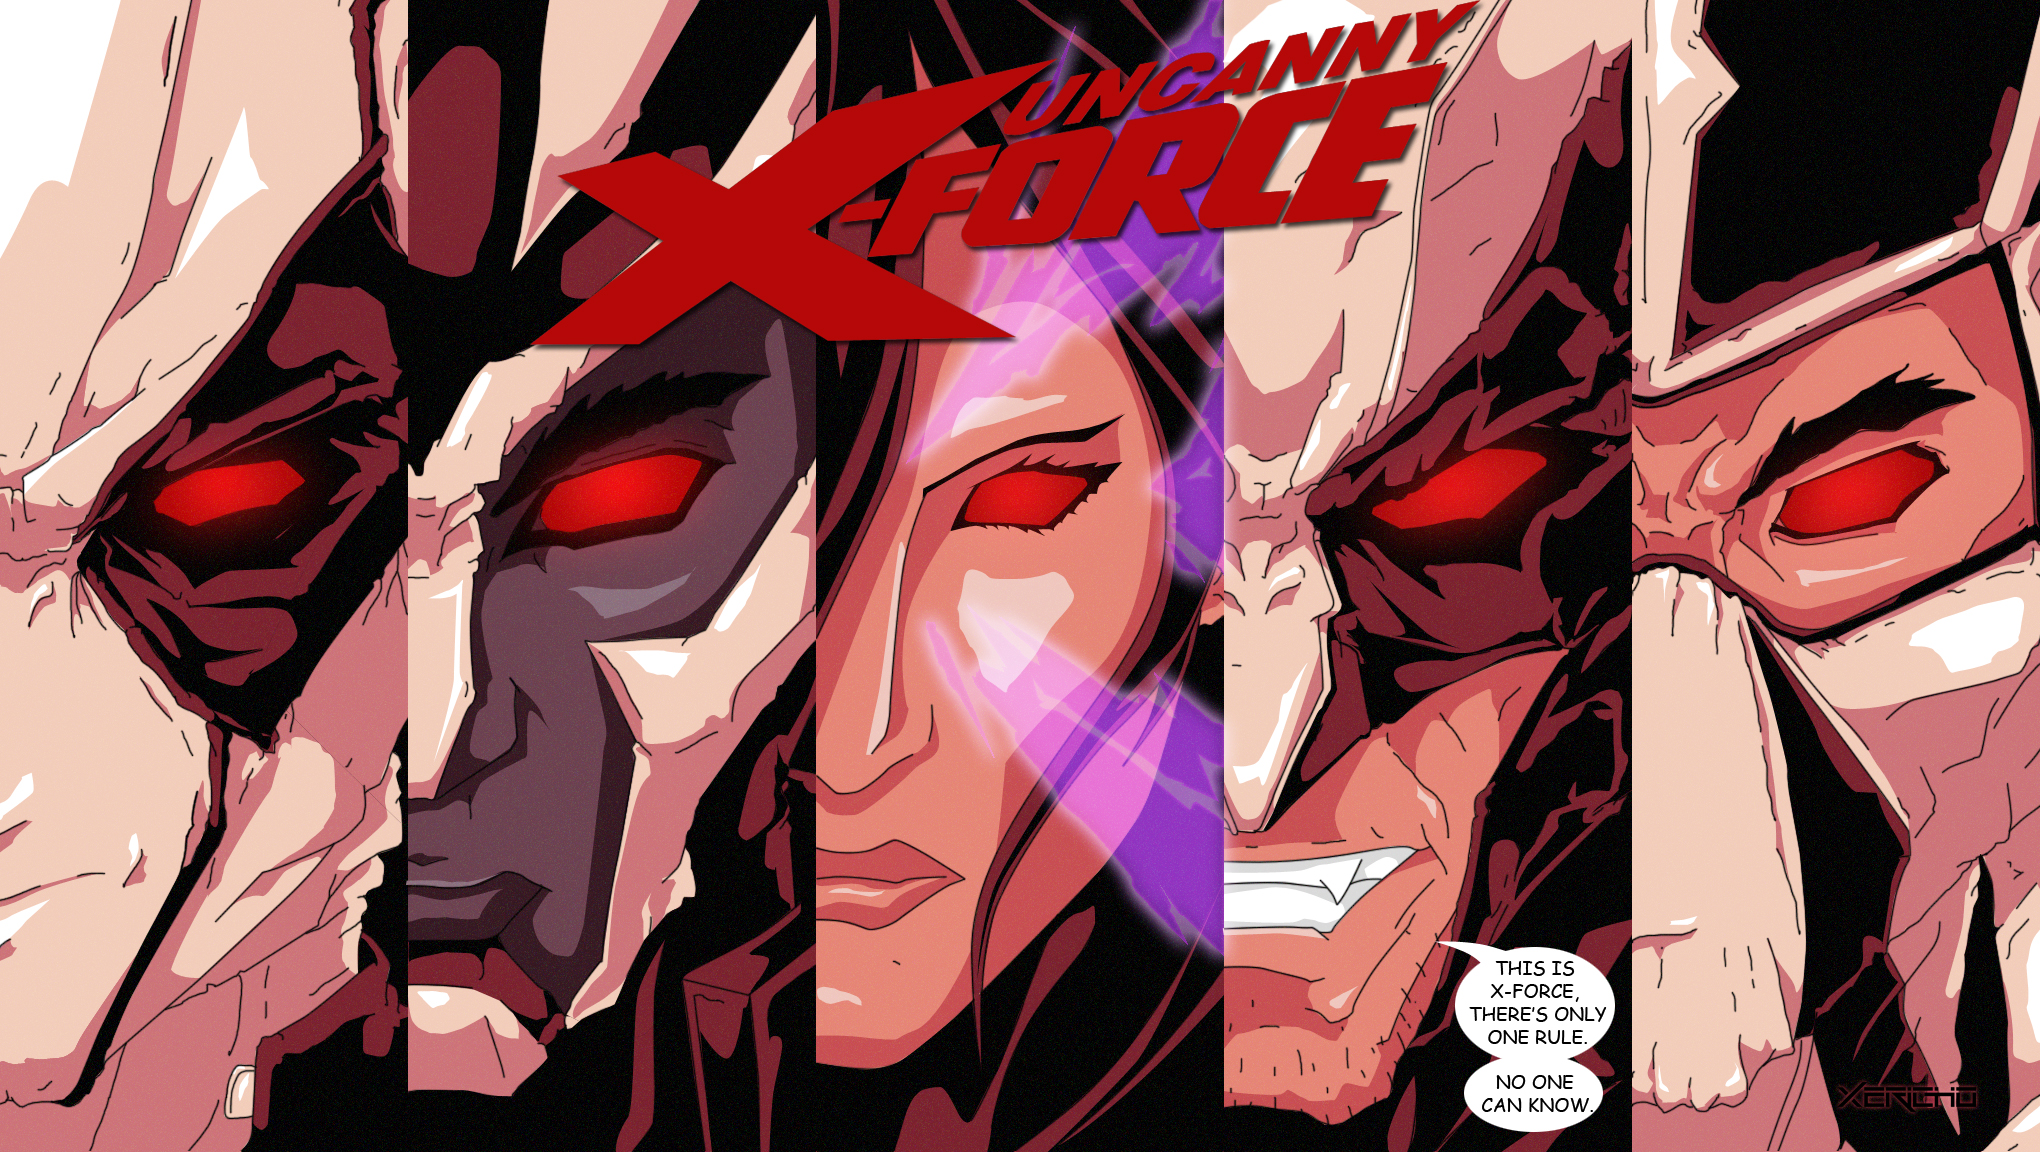 Wolverine and the X-Force on Weapon-X-Wolverine - DeviantArt